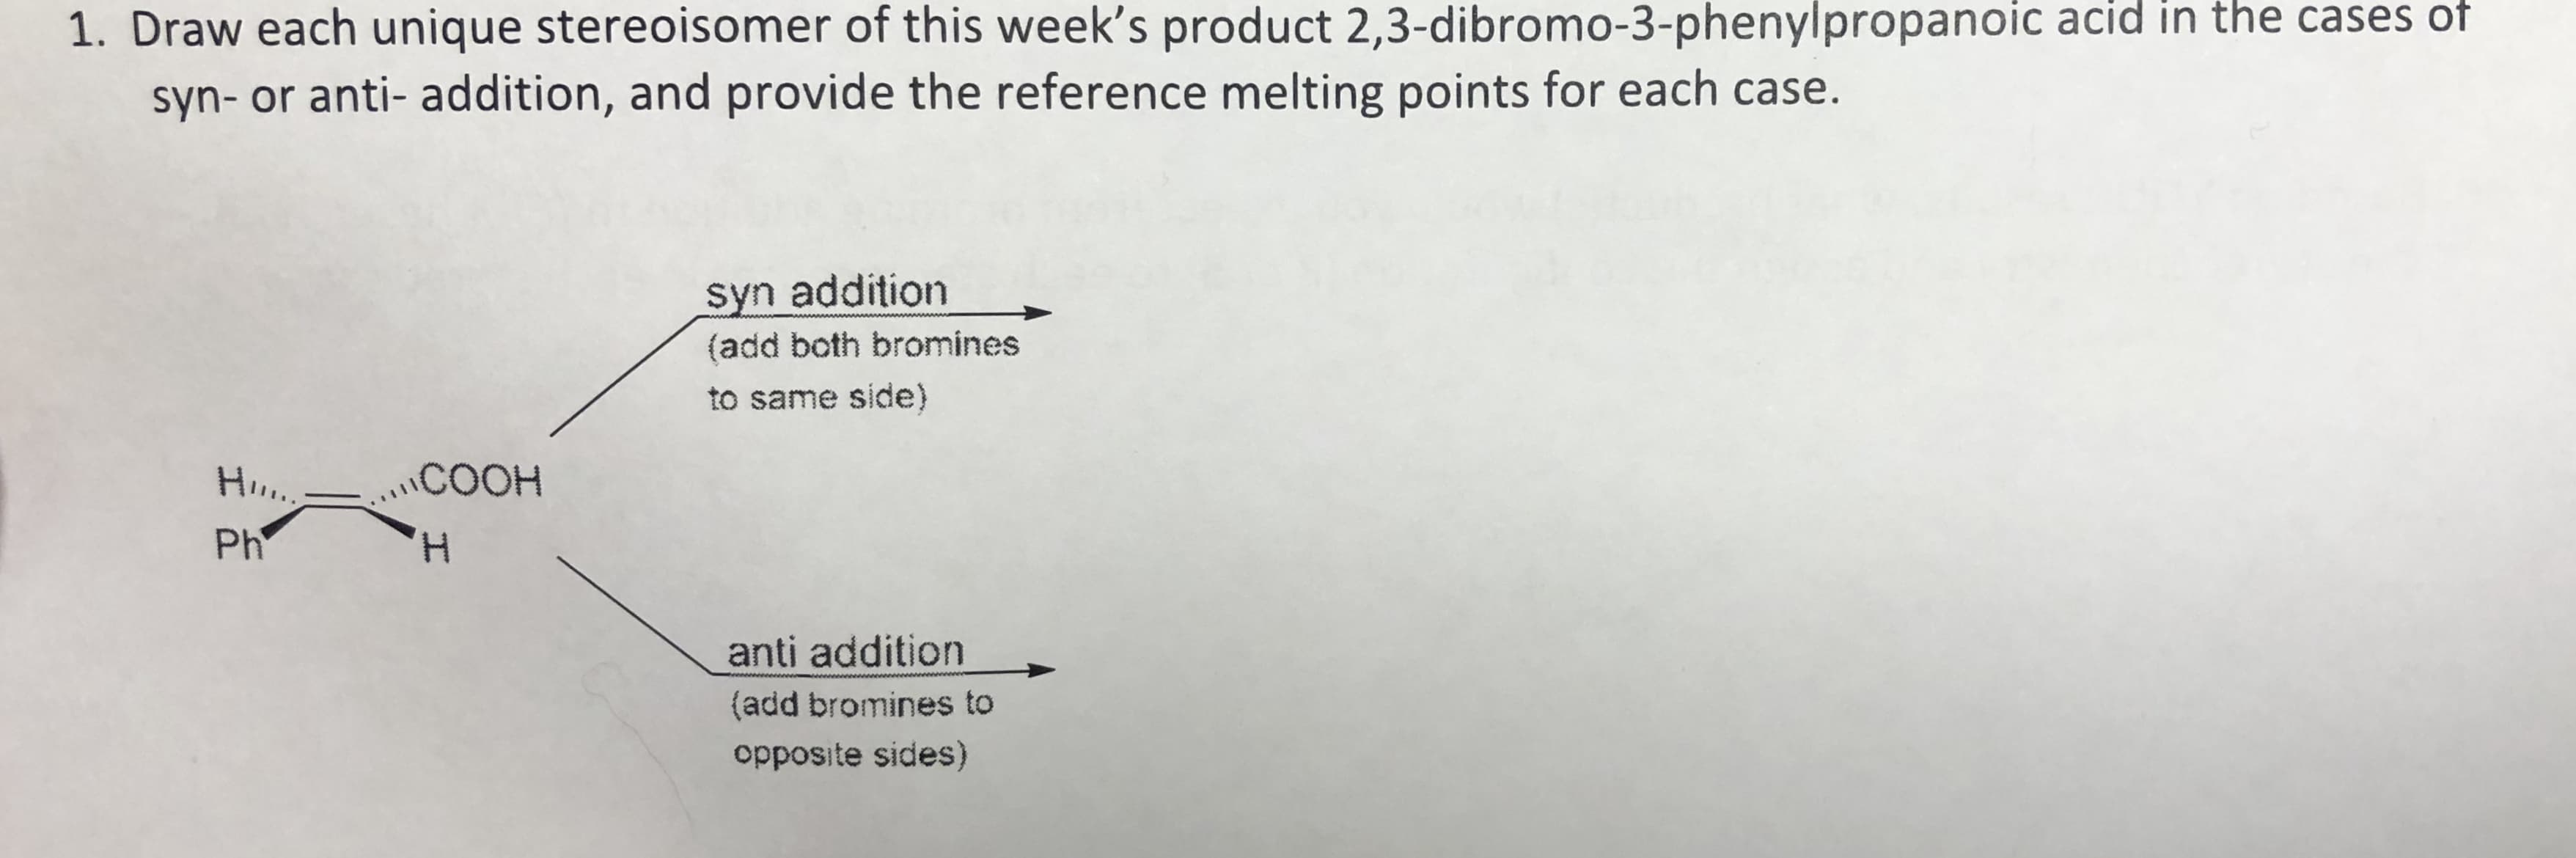 1. Draw each unique stereoisomer of this week's product 2,3-dibromo-3-phenylpropanoic acid in the cases of
syn- or anti- addition, and provide the reference melting points for each case.
syn addition
(add both bromines
to same side)
Ho.,
COOH
Ph
H,
anti addition
(add bromines to
opposite sides)
